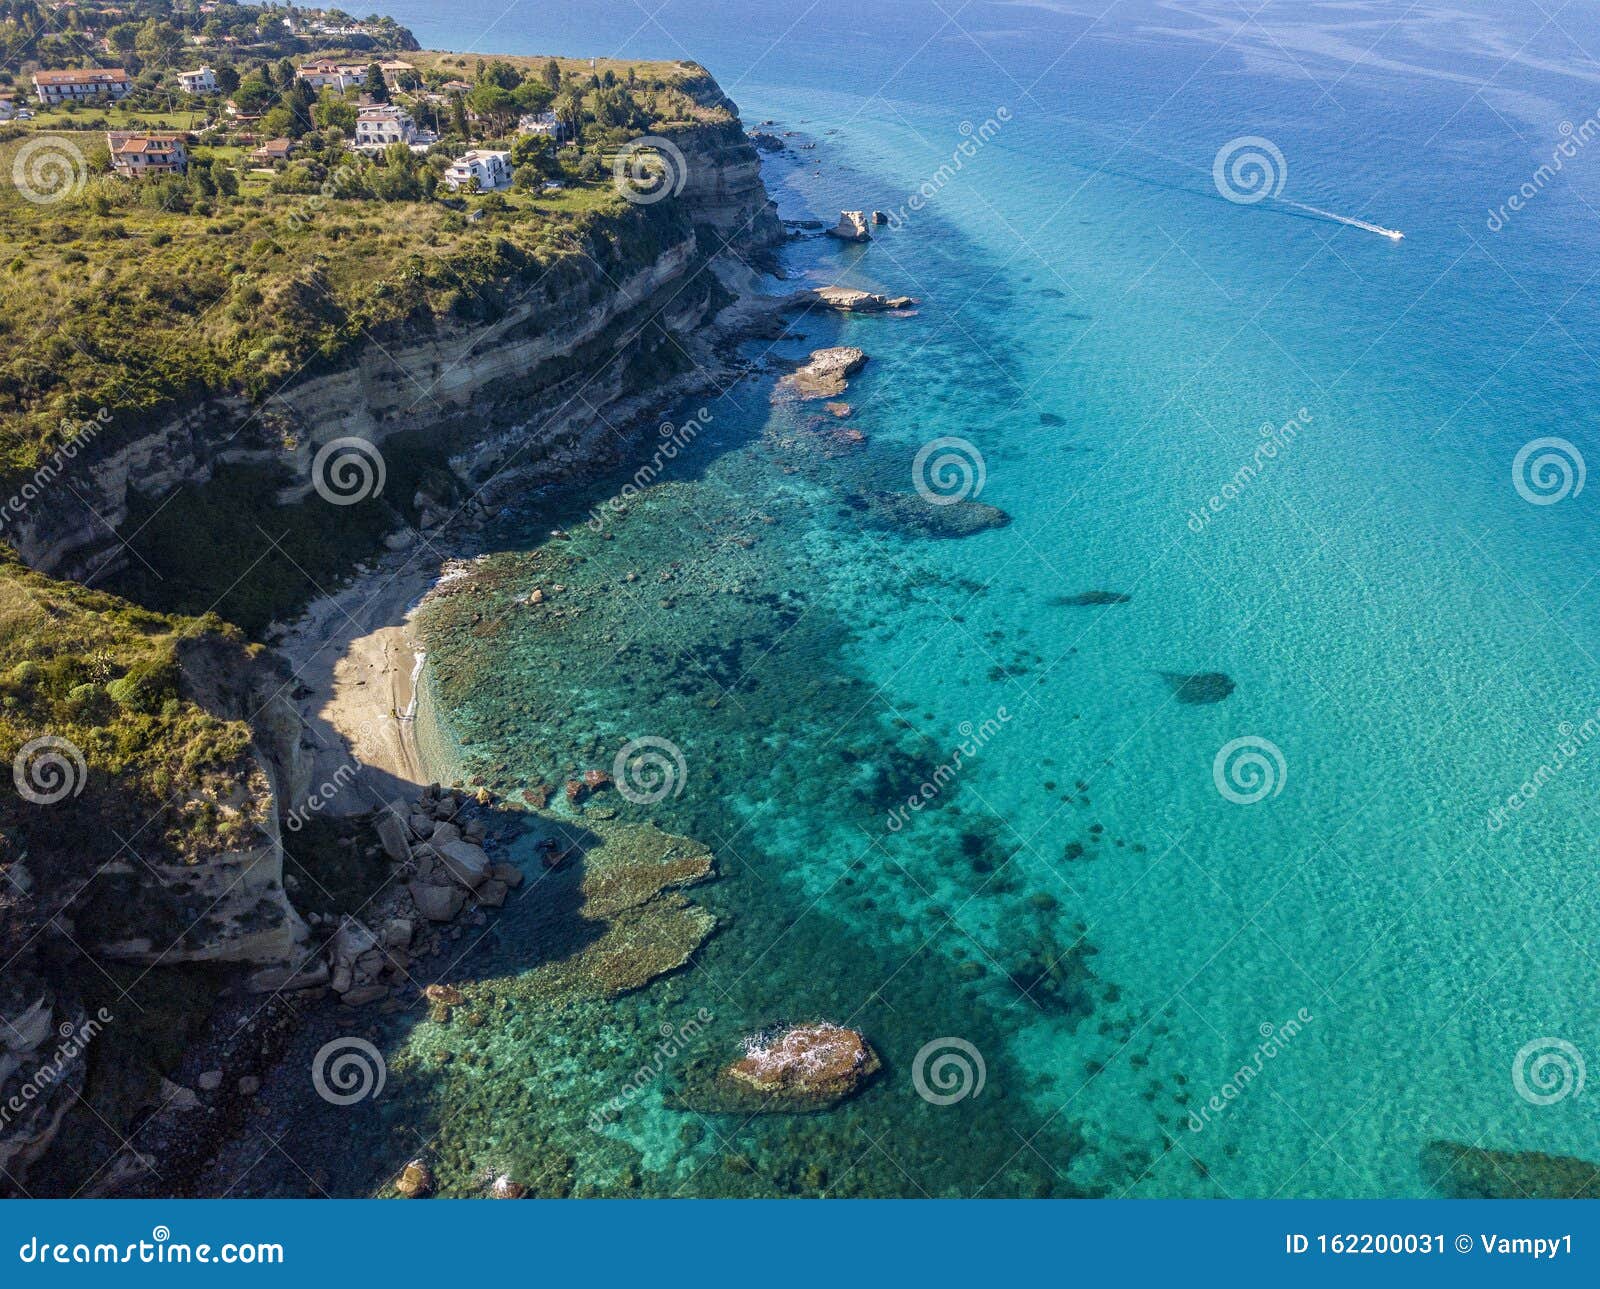 aerial view of the calabrian coast, cliffs overlooking the crystal clear sea and luxury villas. riaci, tropea, italy